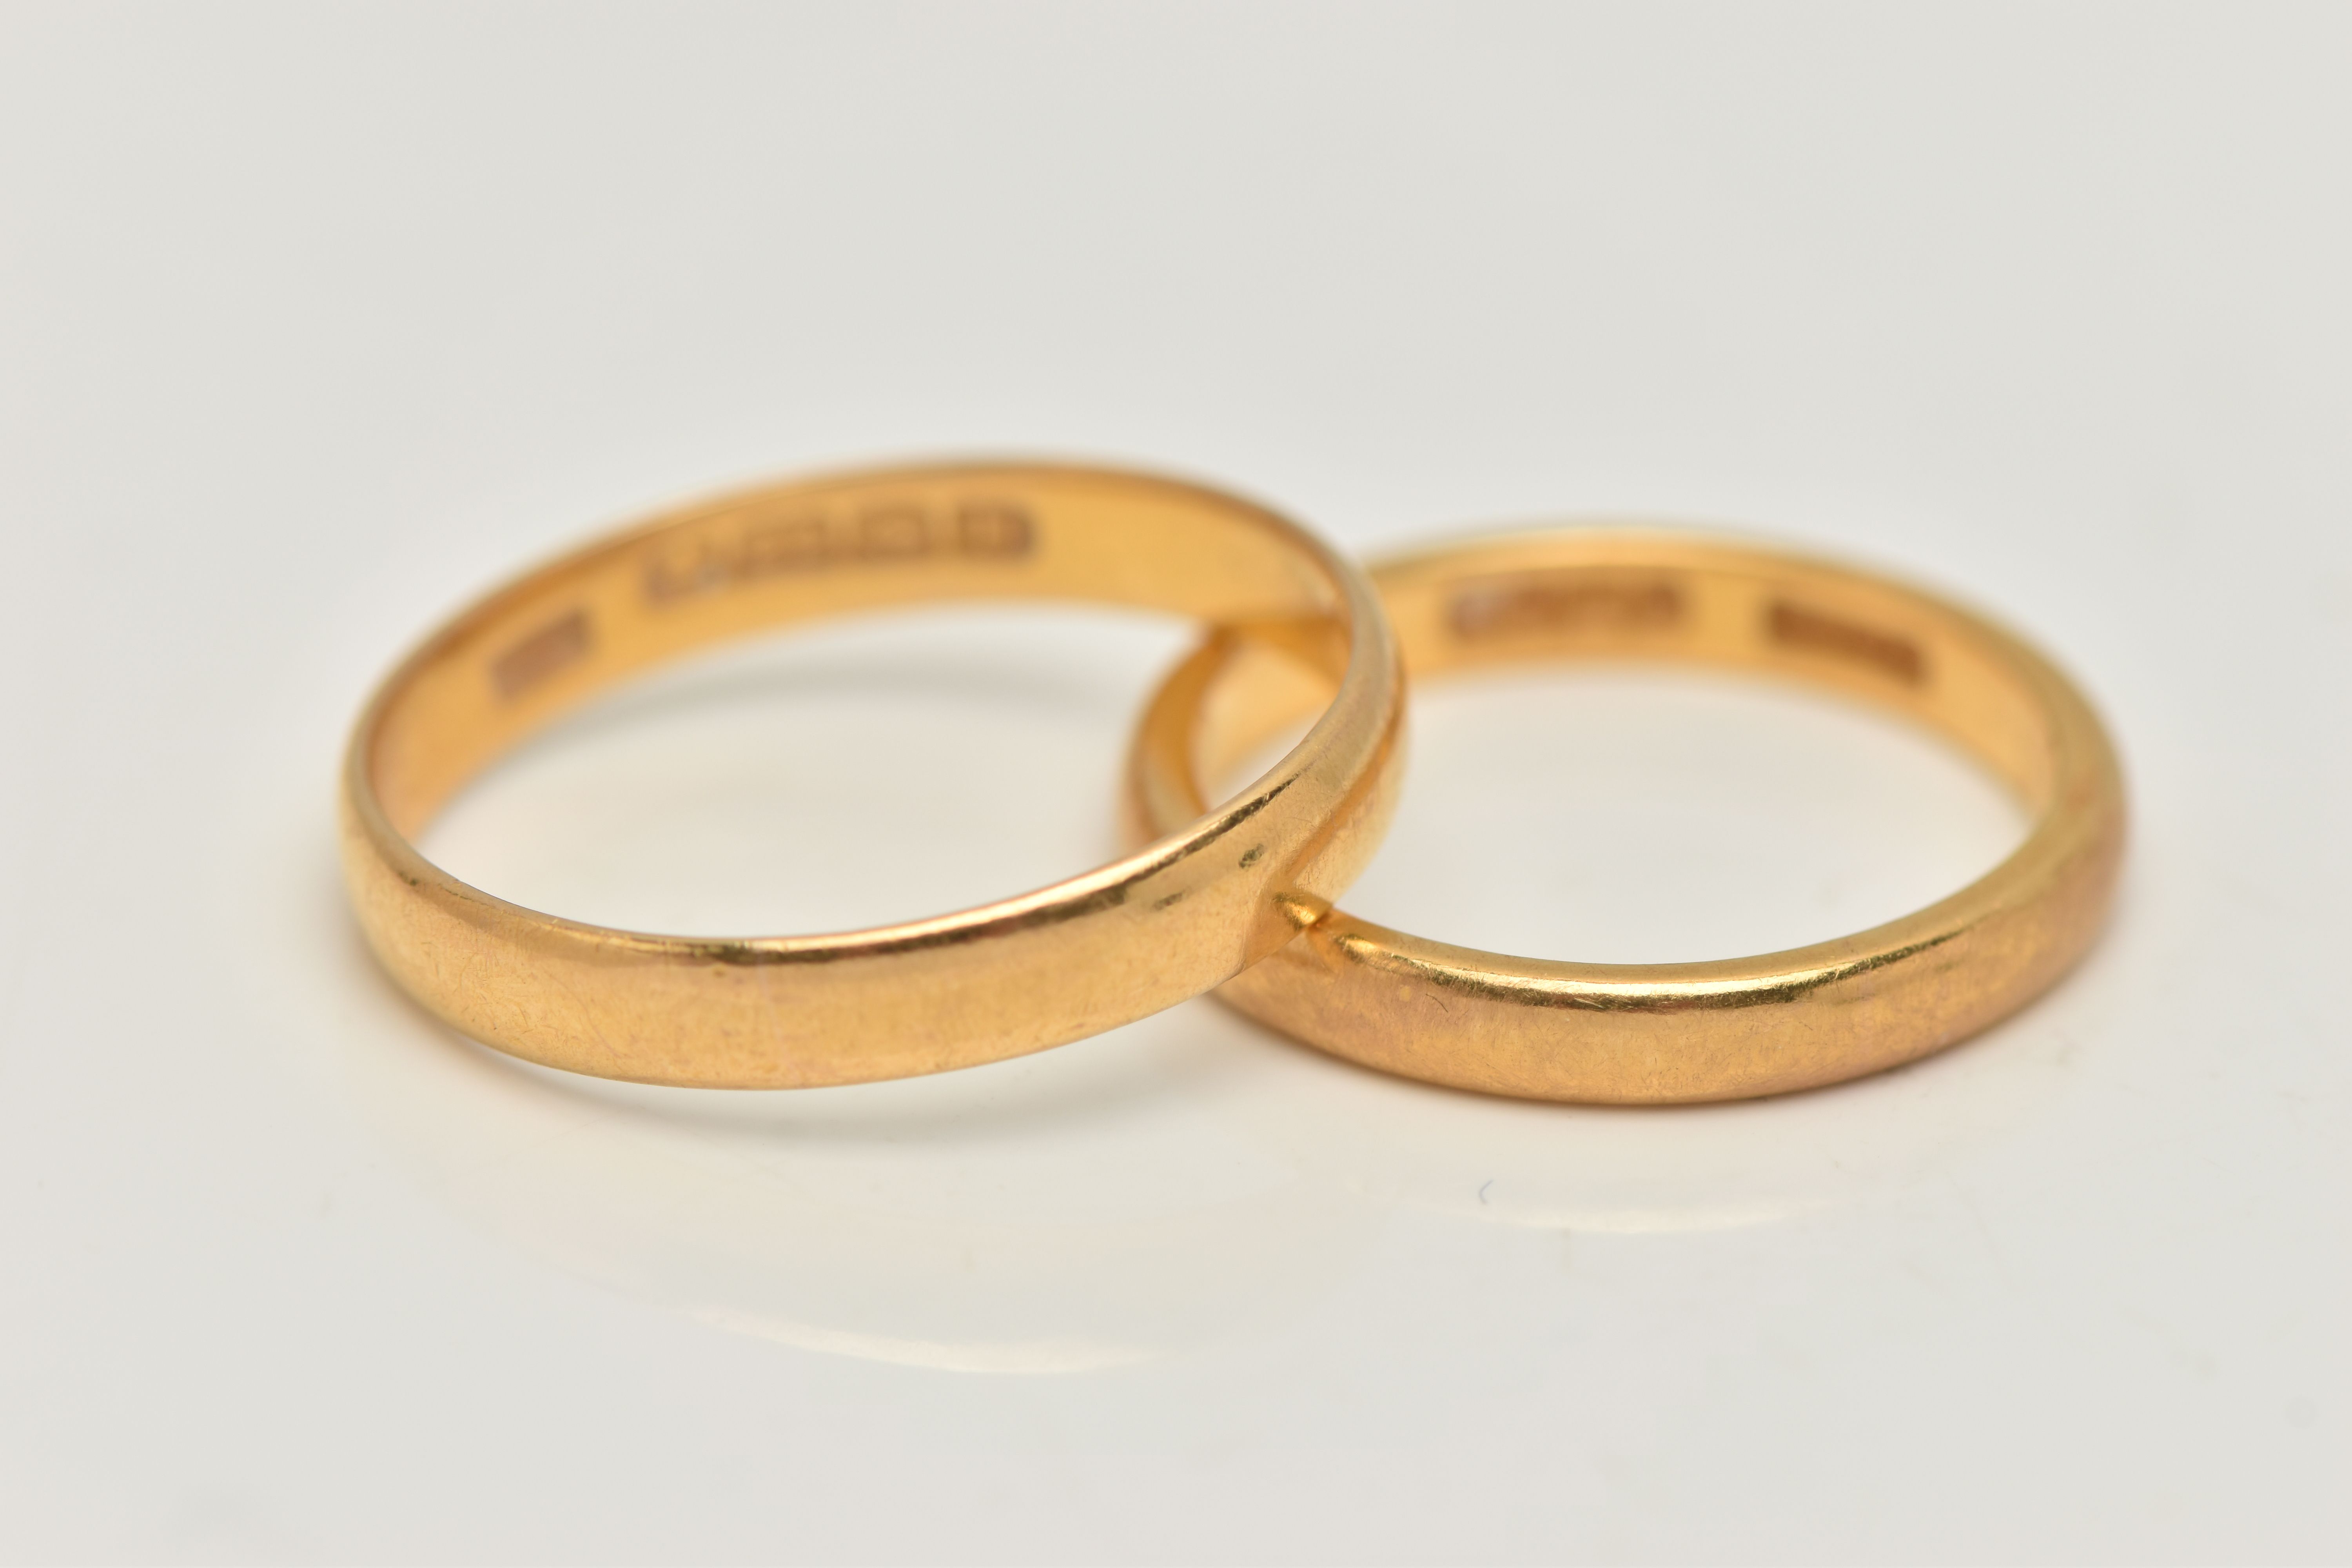 TWO 22CT GOLD BAND RINGS, the first a plain polished band ring, approximate width 2.5mm x depth 1. - Image 2 of 2